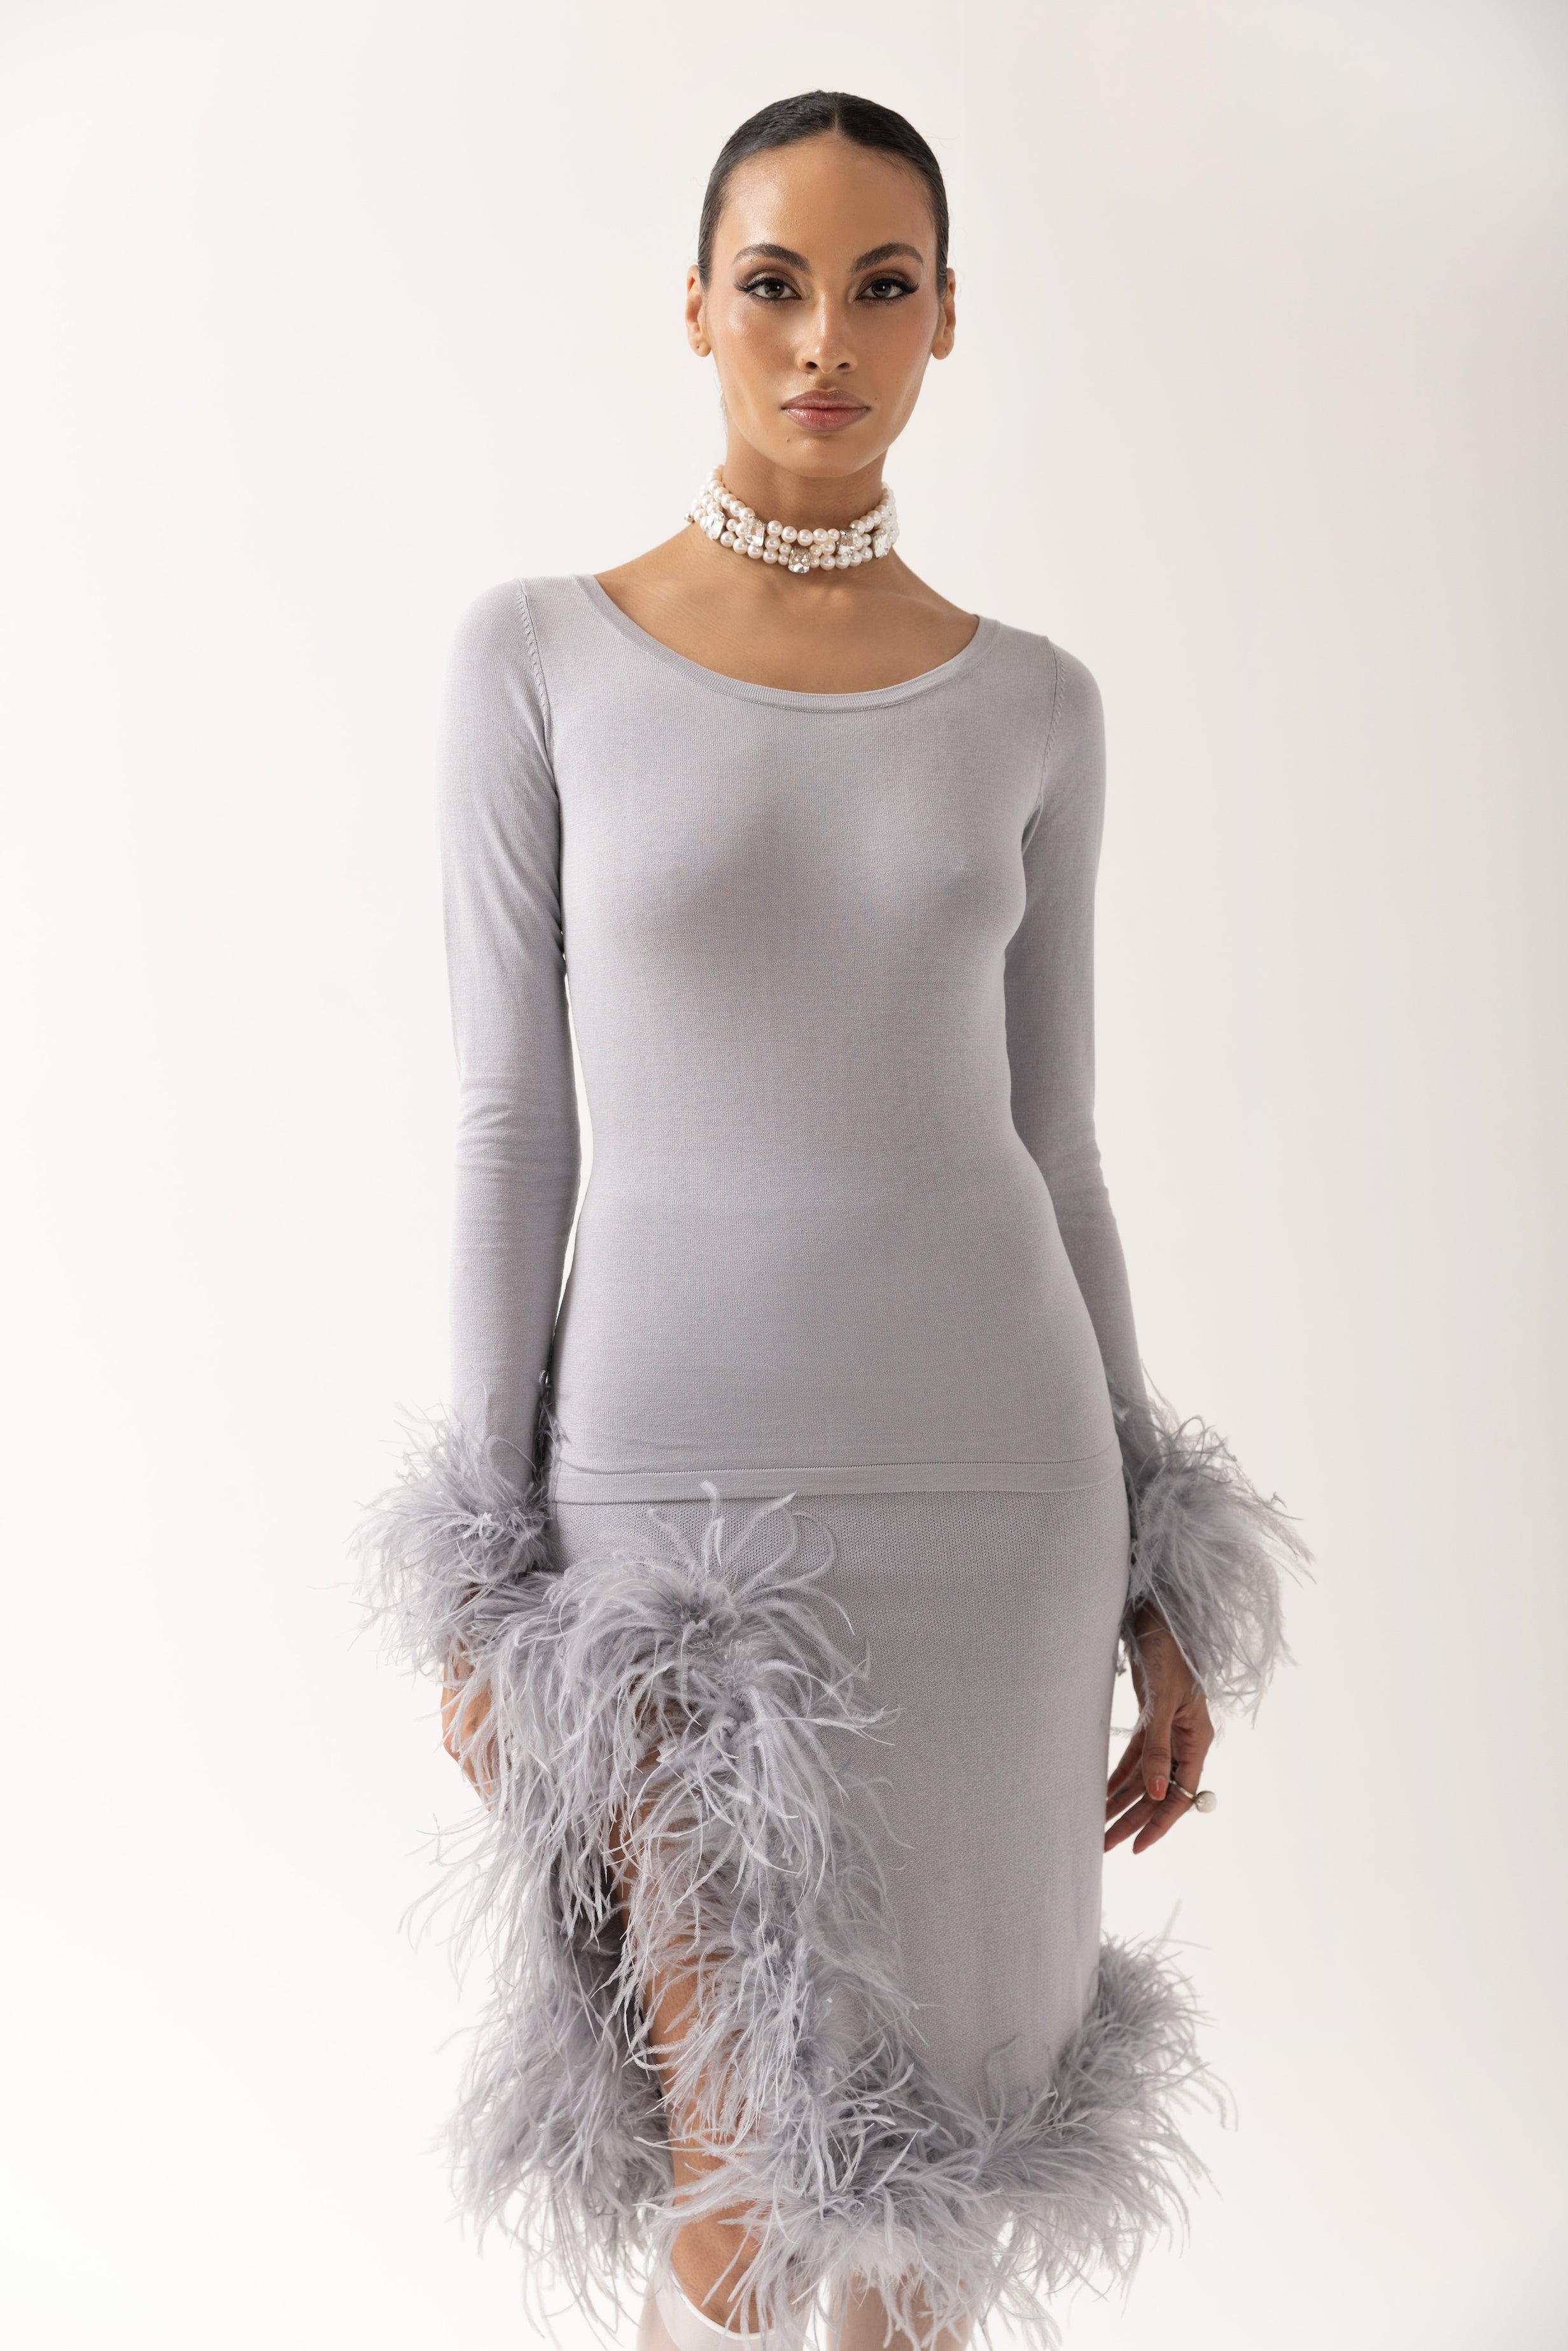 andreeva women's grey knit top with feathers